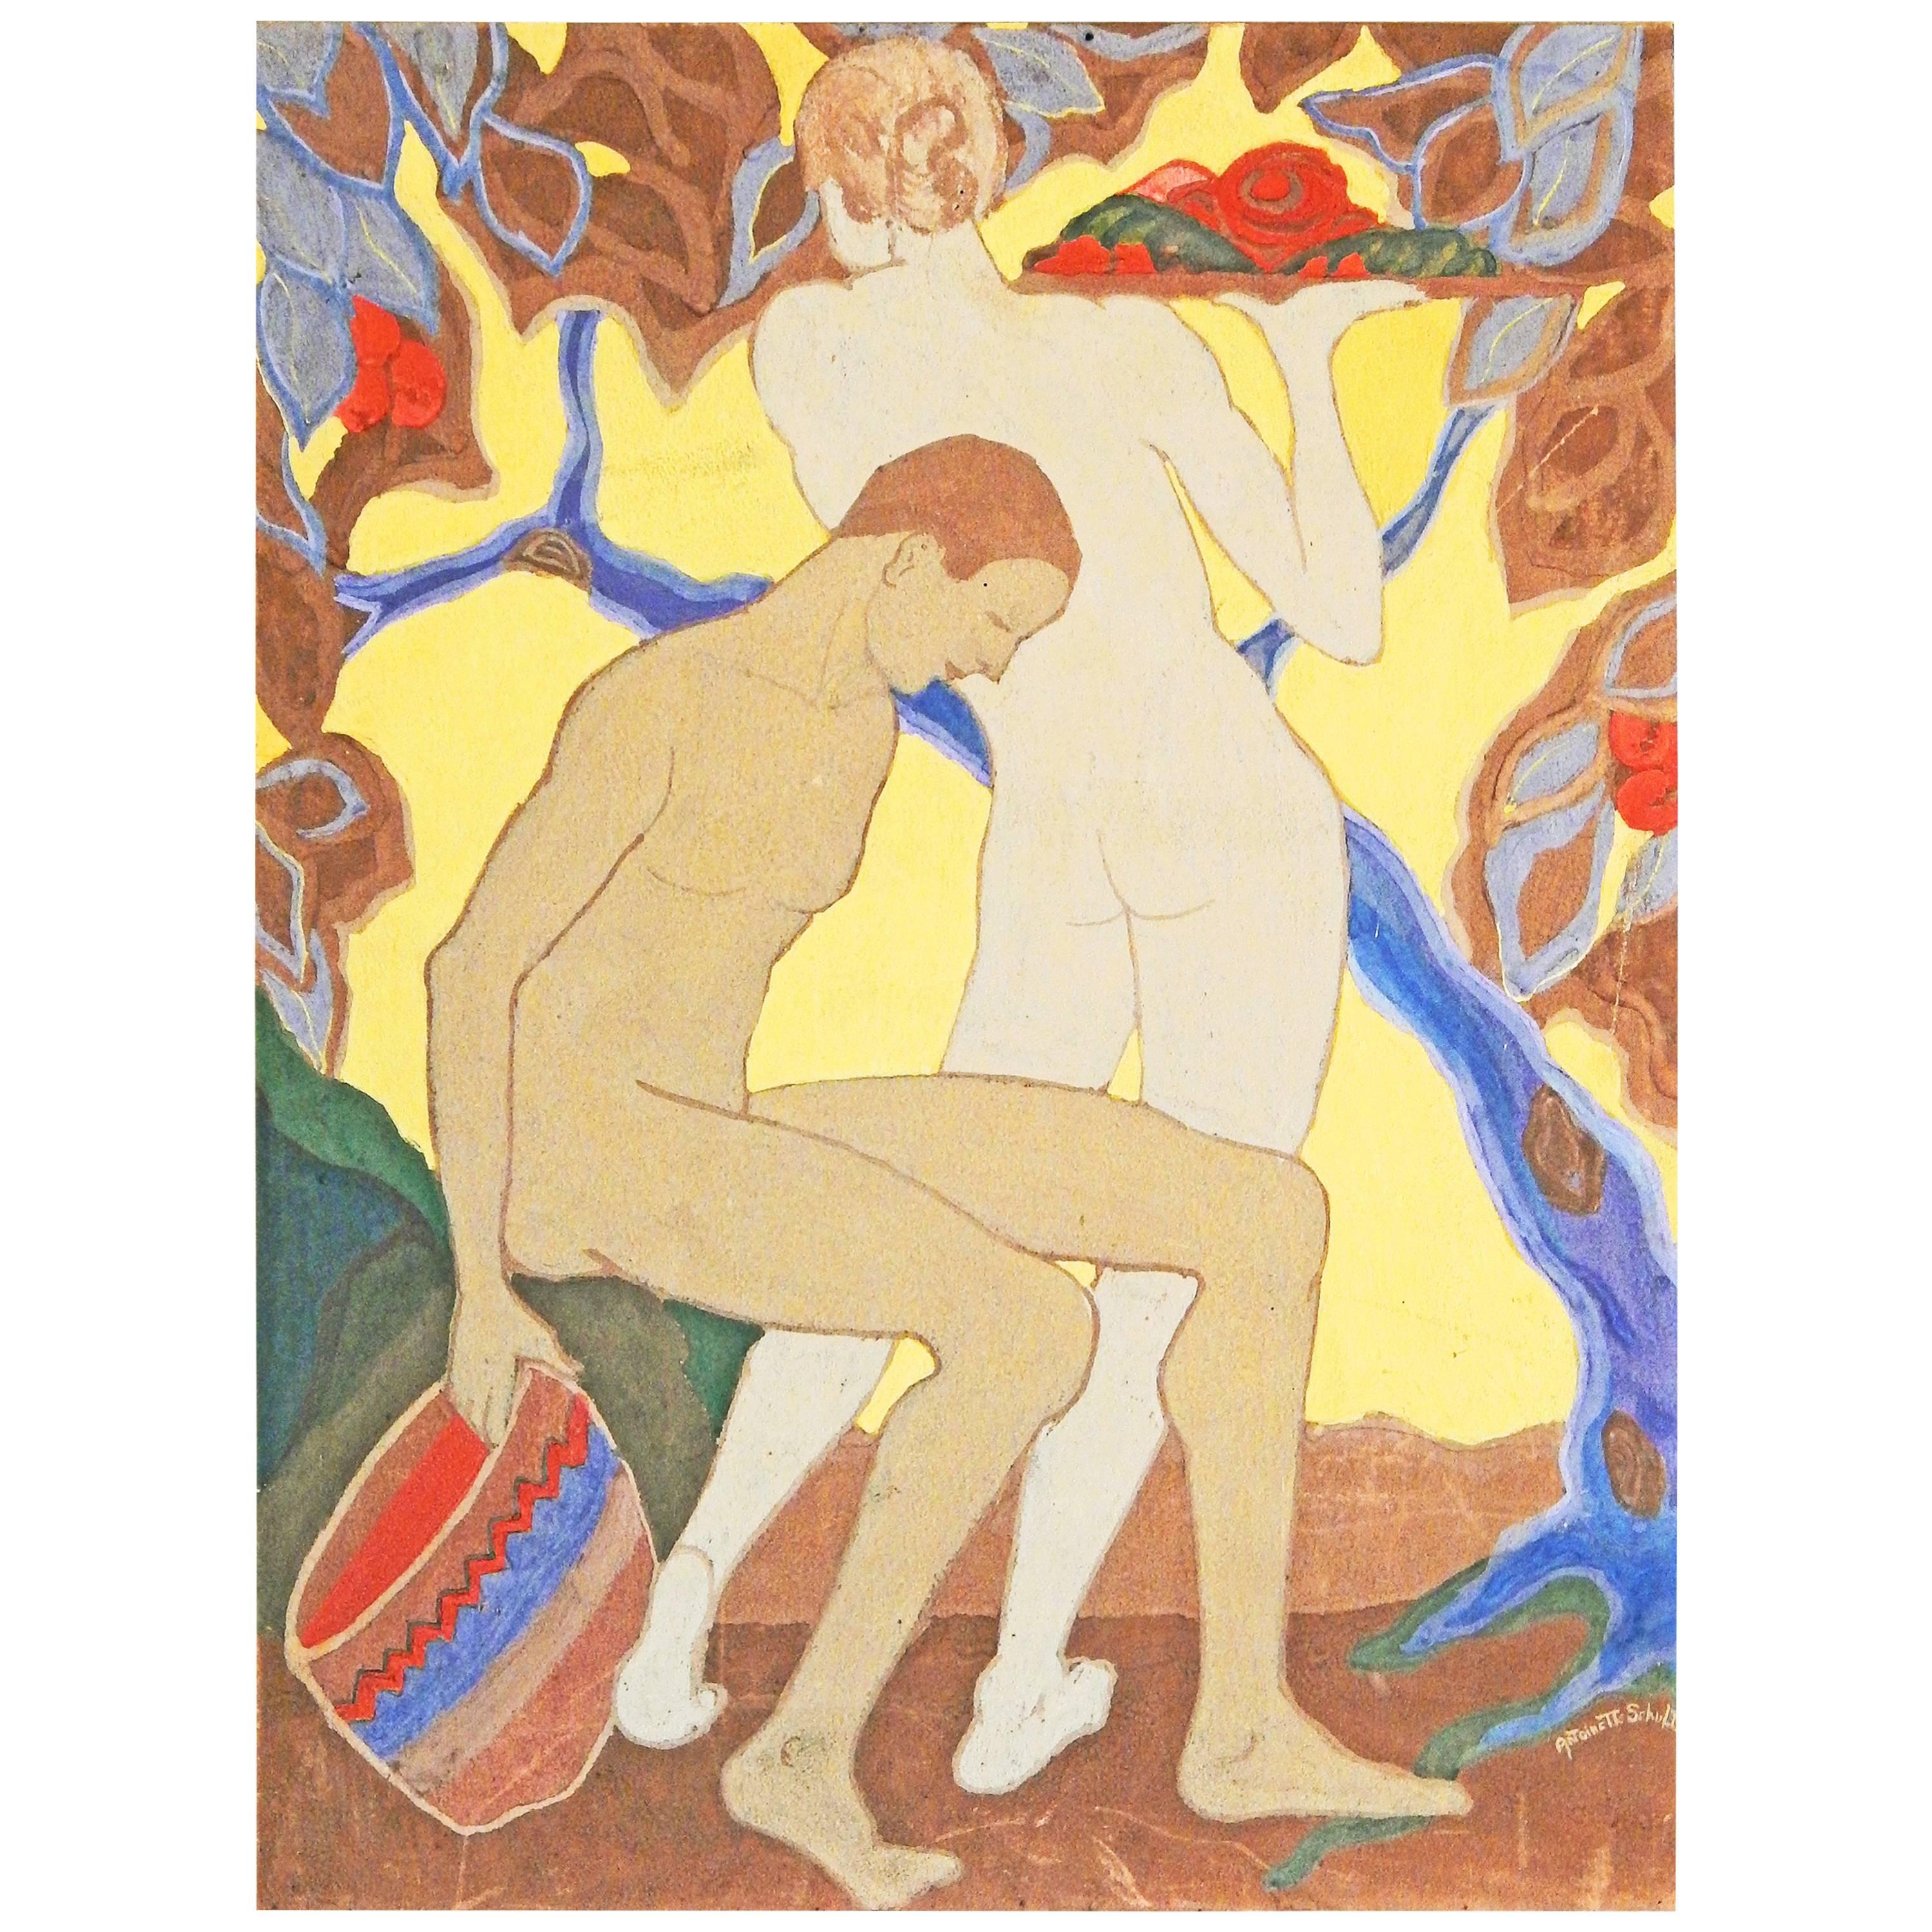 "Gathering Fruit", Vividly-Hued Art Deco Painting with Nudes by Schulte